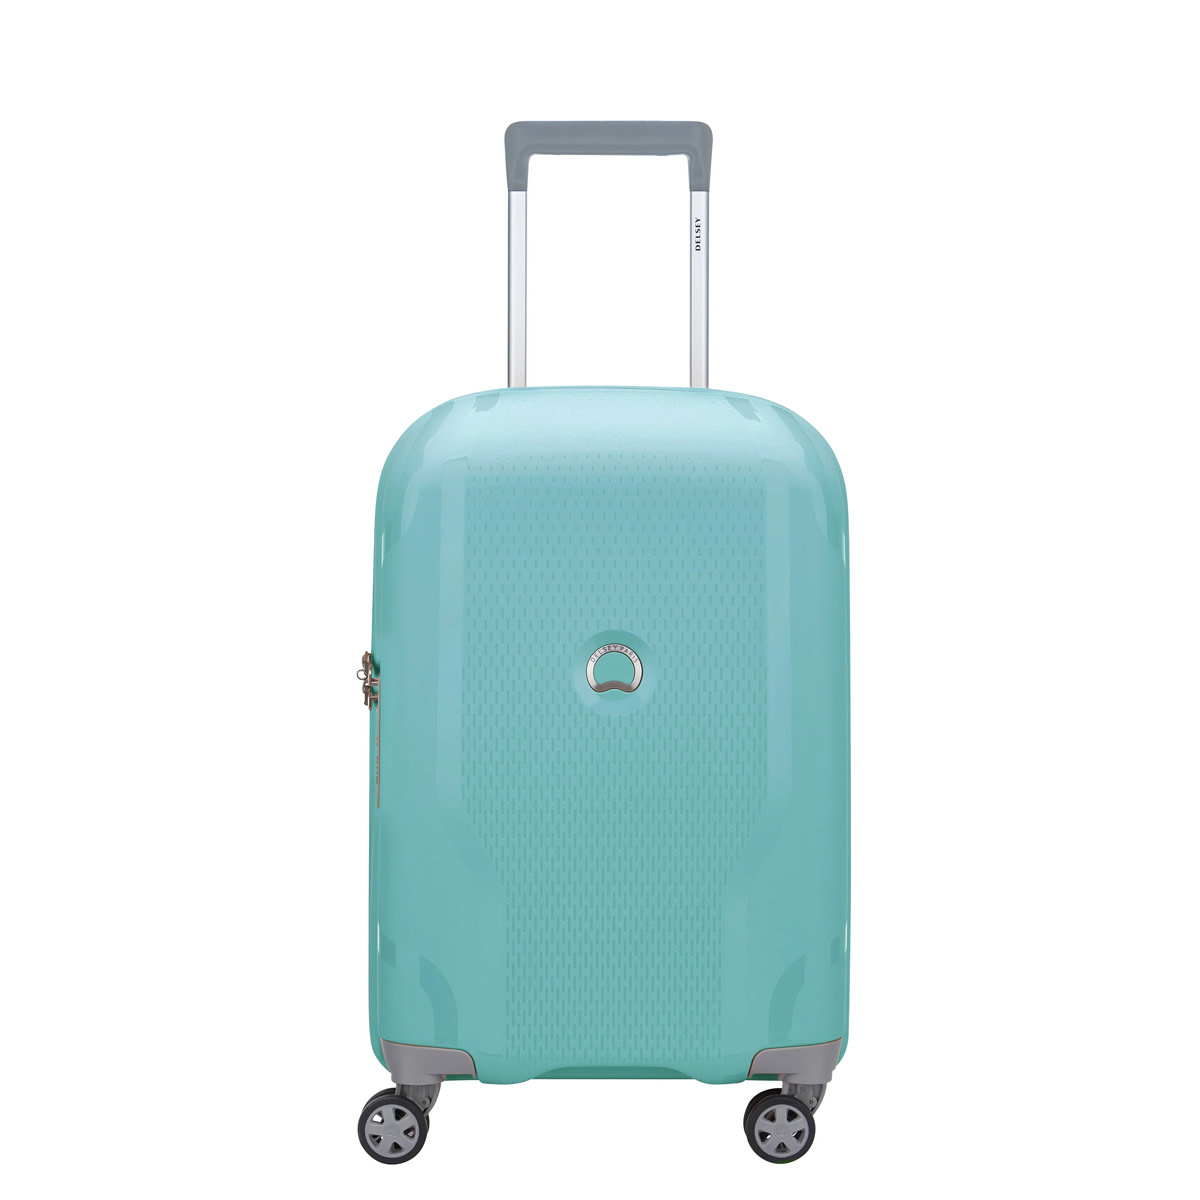 Ultra-lightweight luggage piece from DELSEY